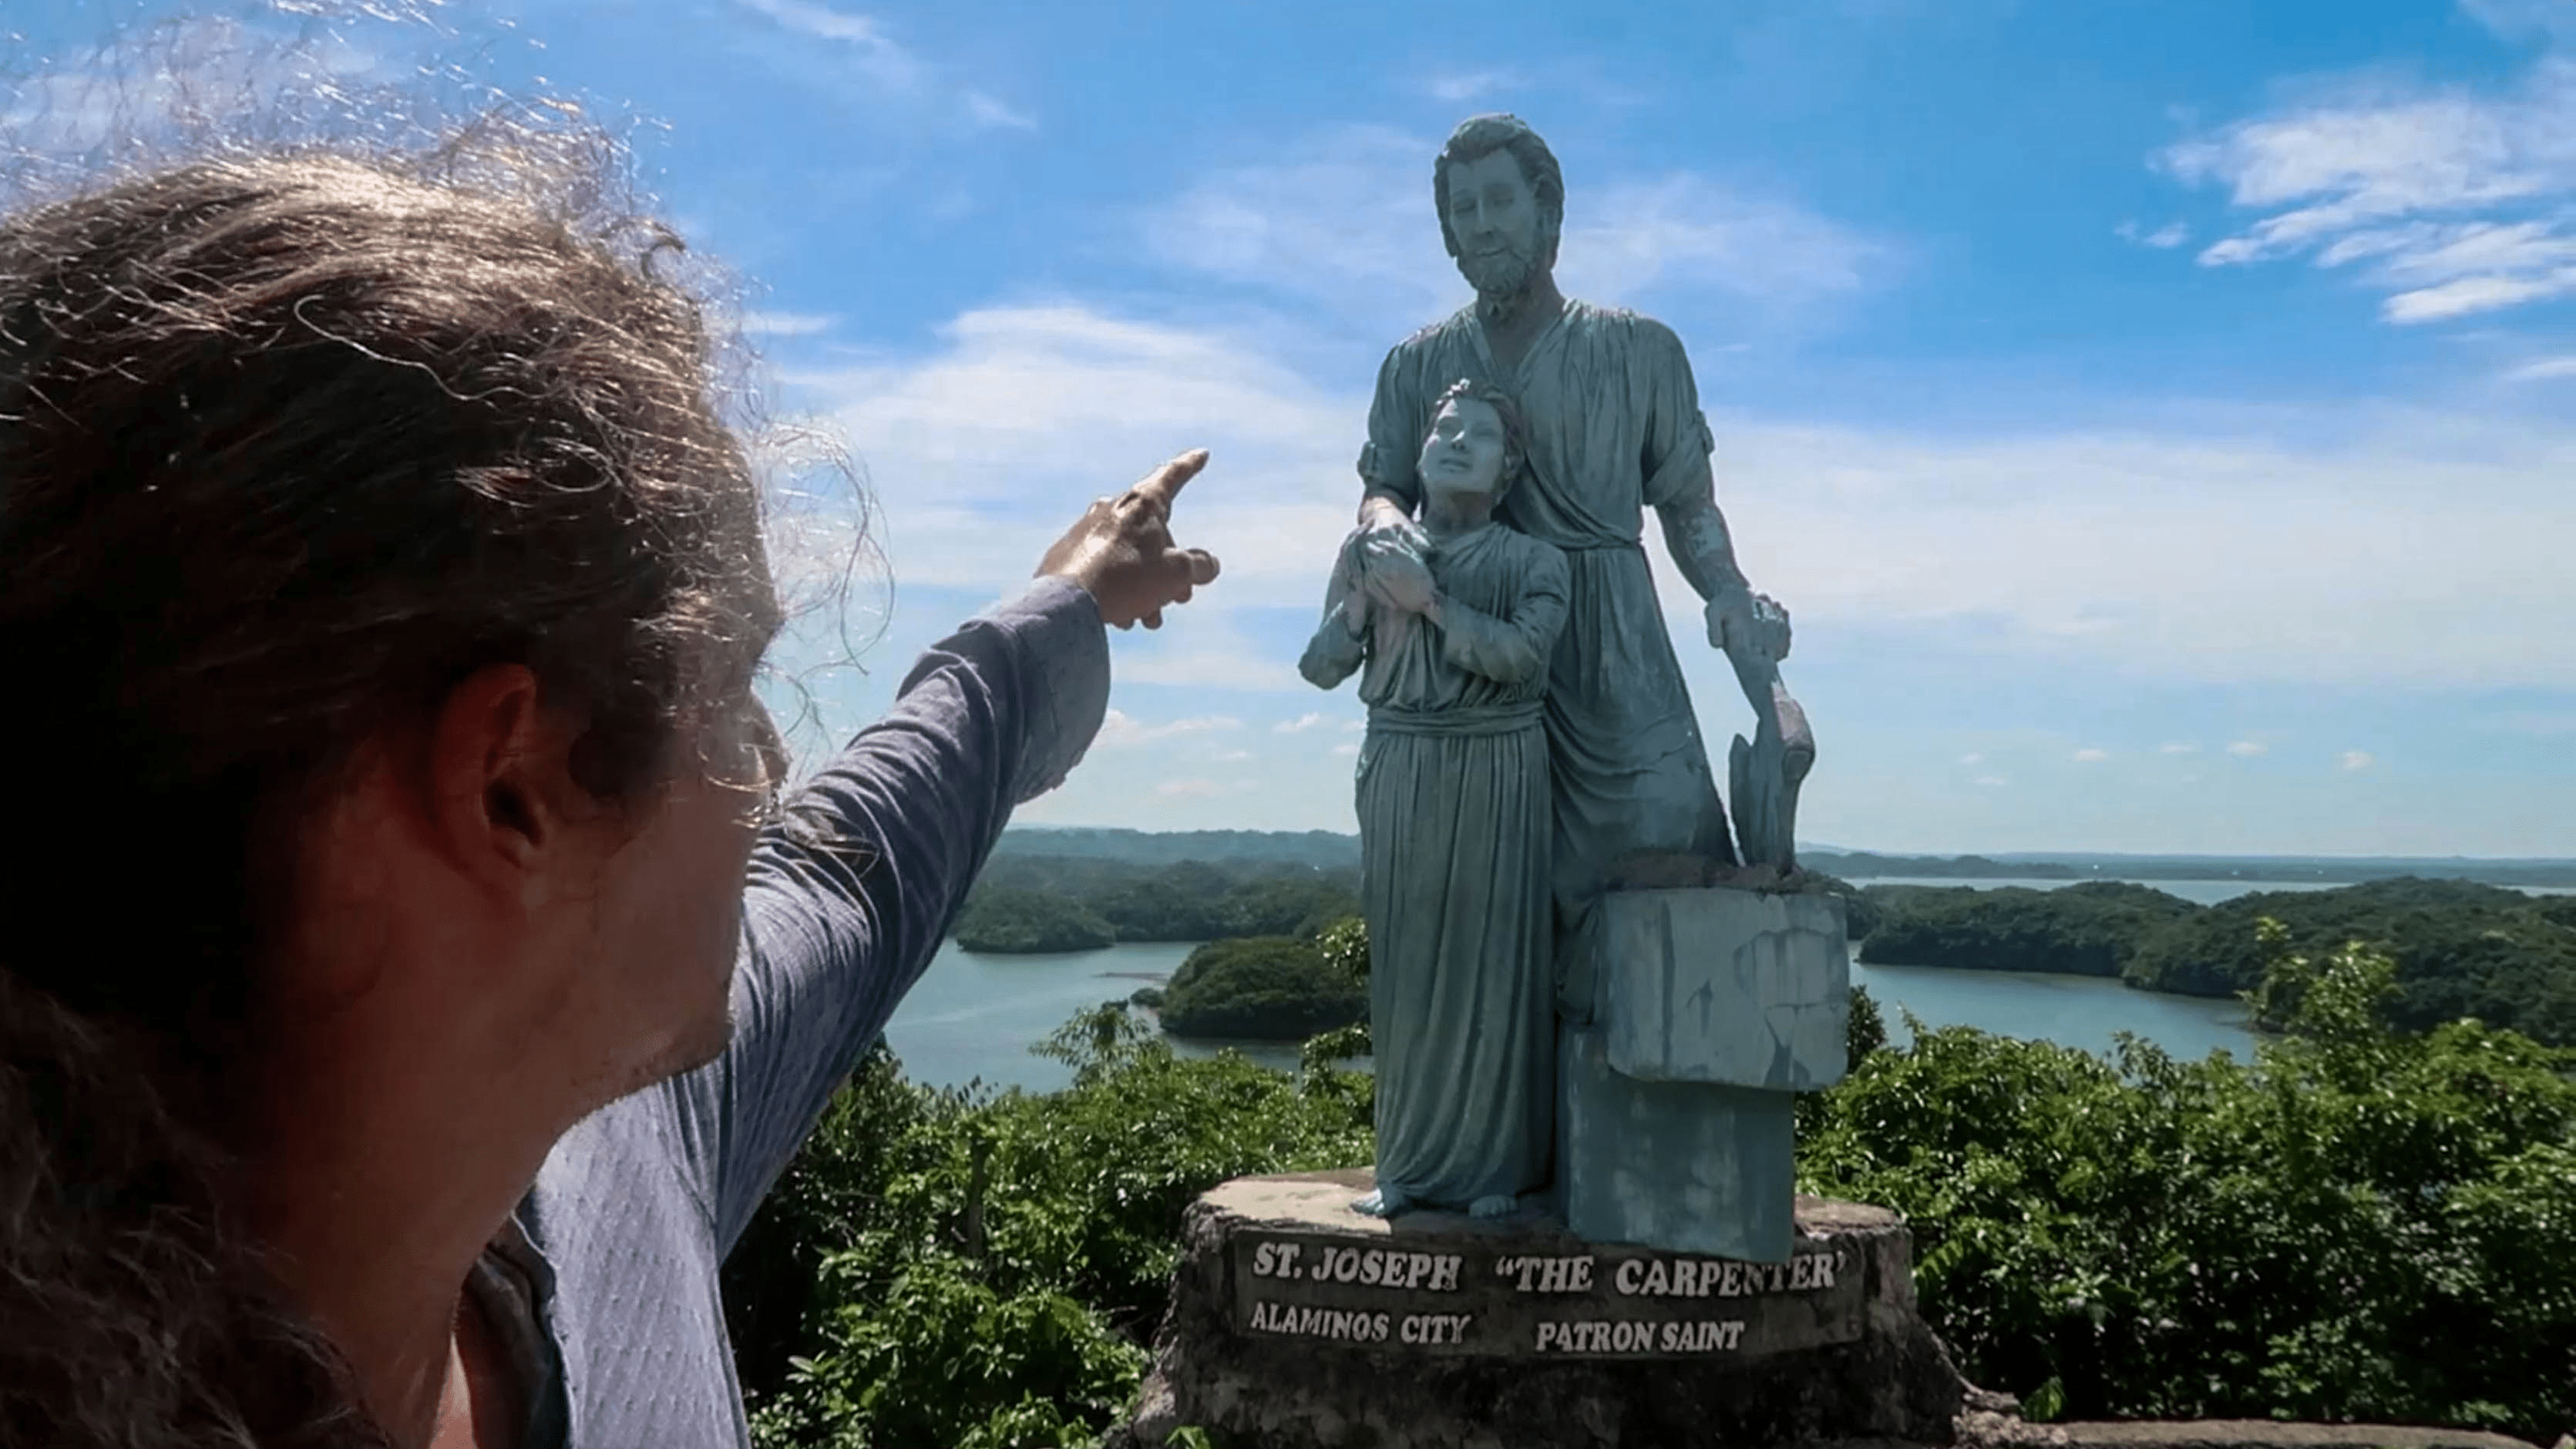 lenny through paradise pointing at statue at hundred islands pangasinan philippines